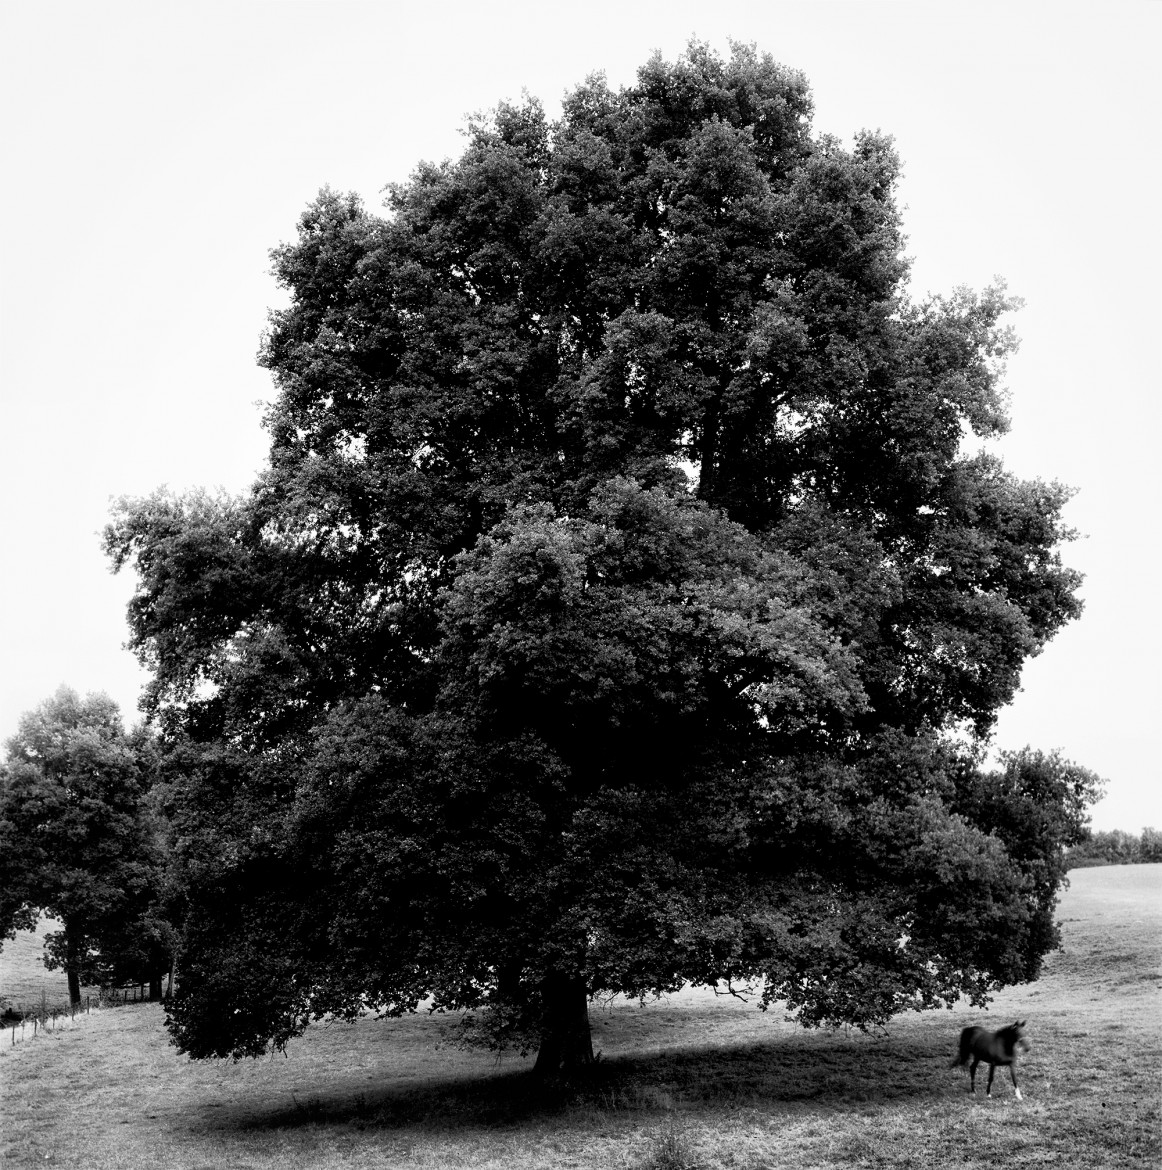 The great oak tree and the horse